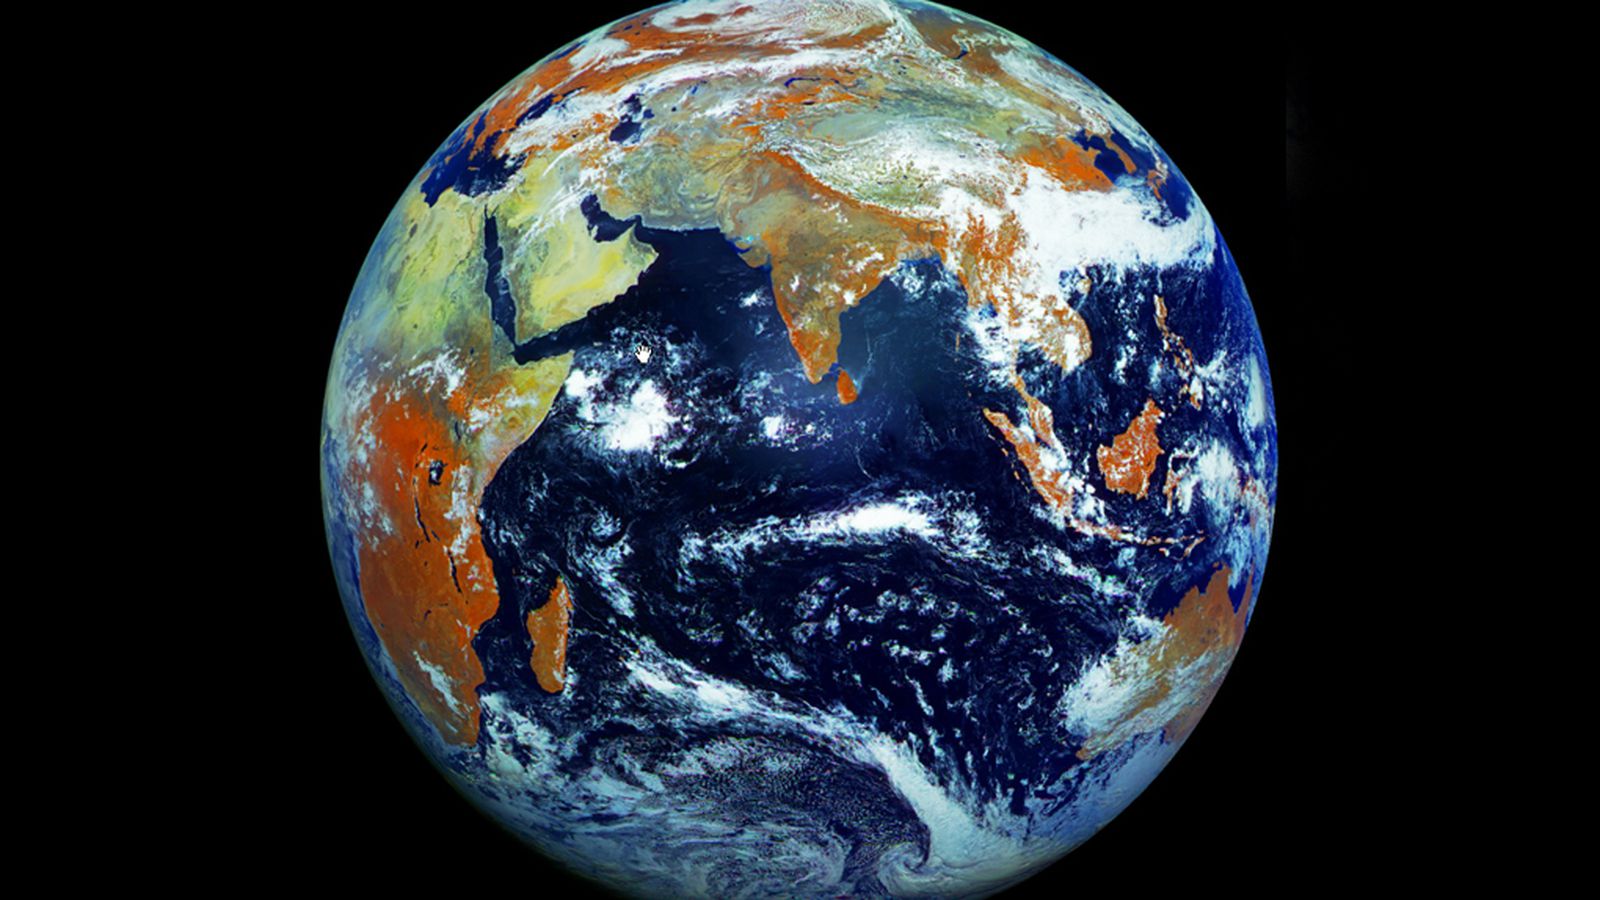 Russian Satellite S Megapixel Image Of Earth Is Most Detailed